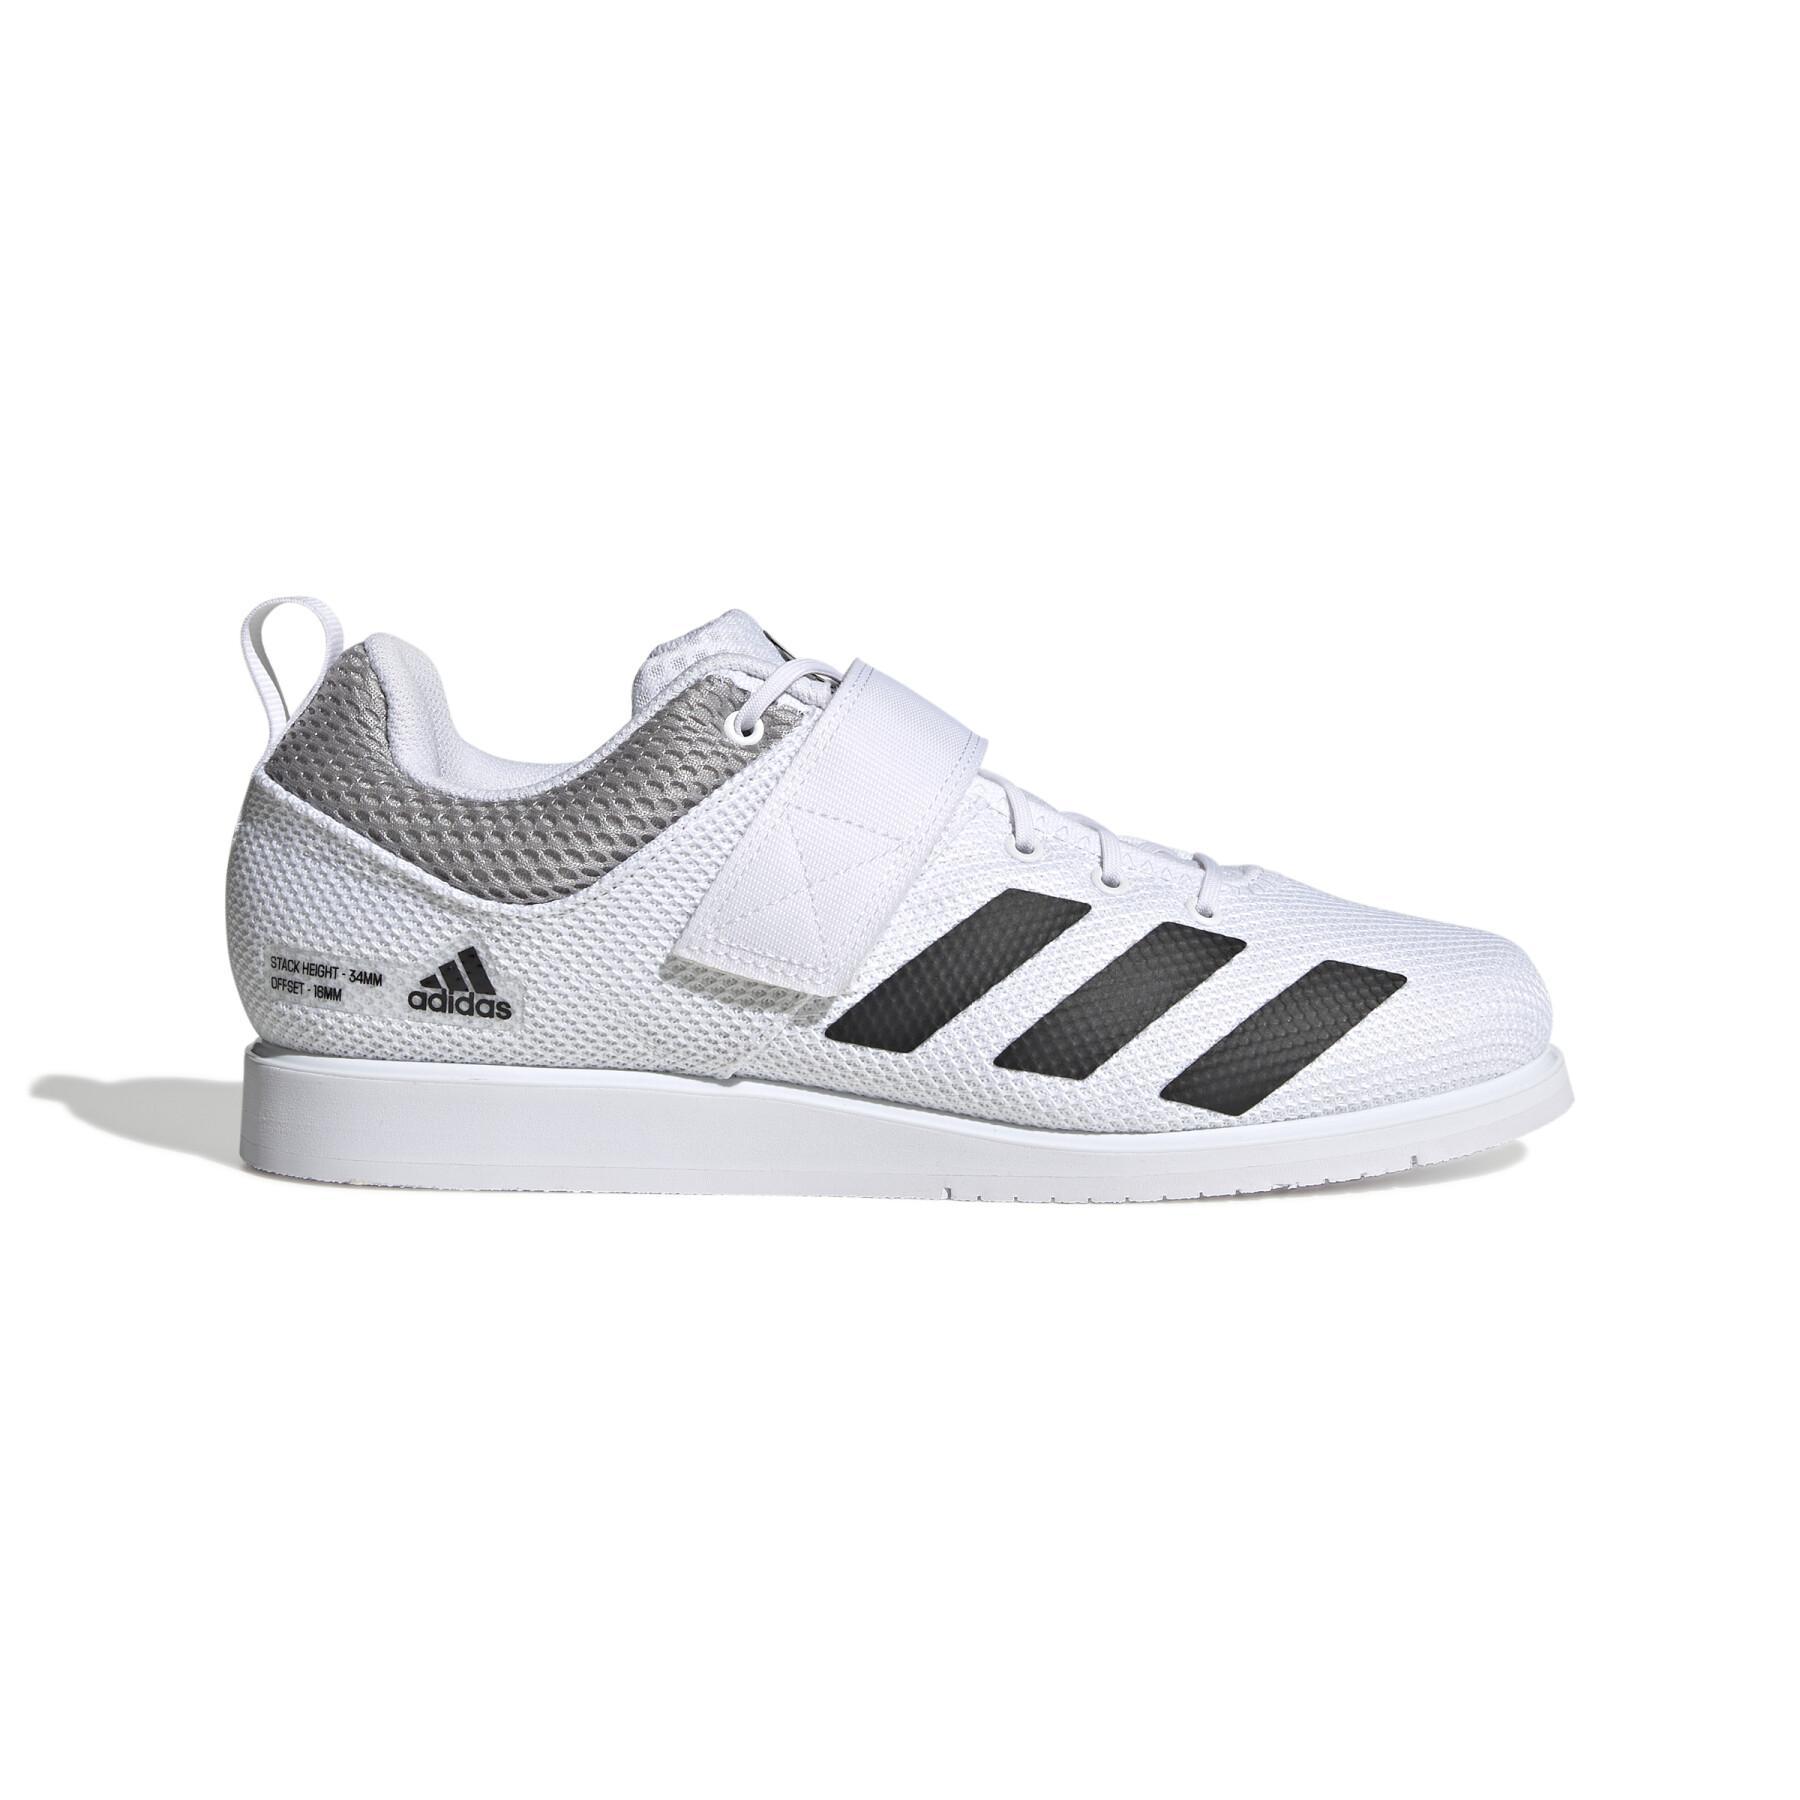 Weightlifting shoes adidas 110 Powerlift 5